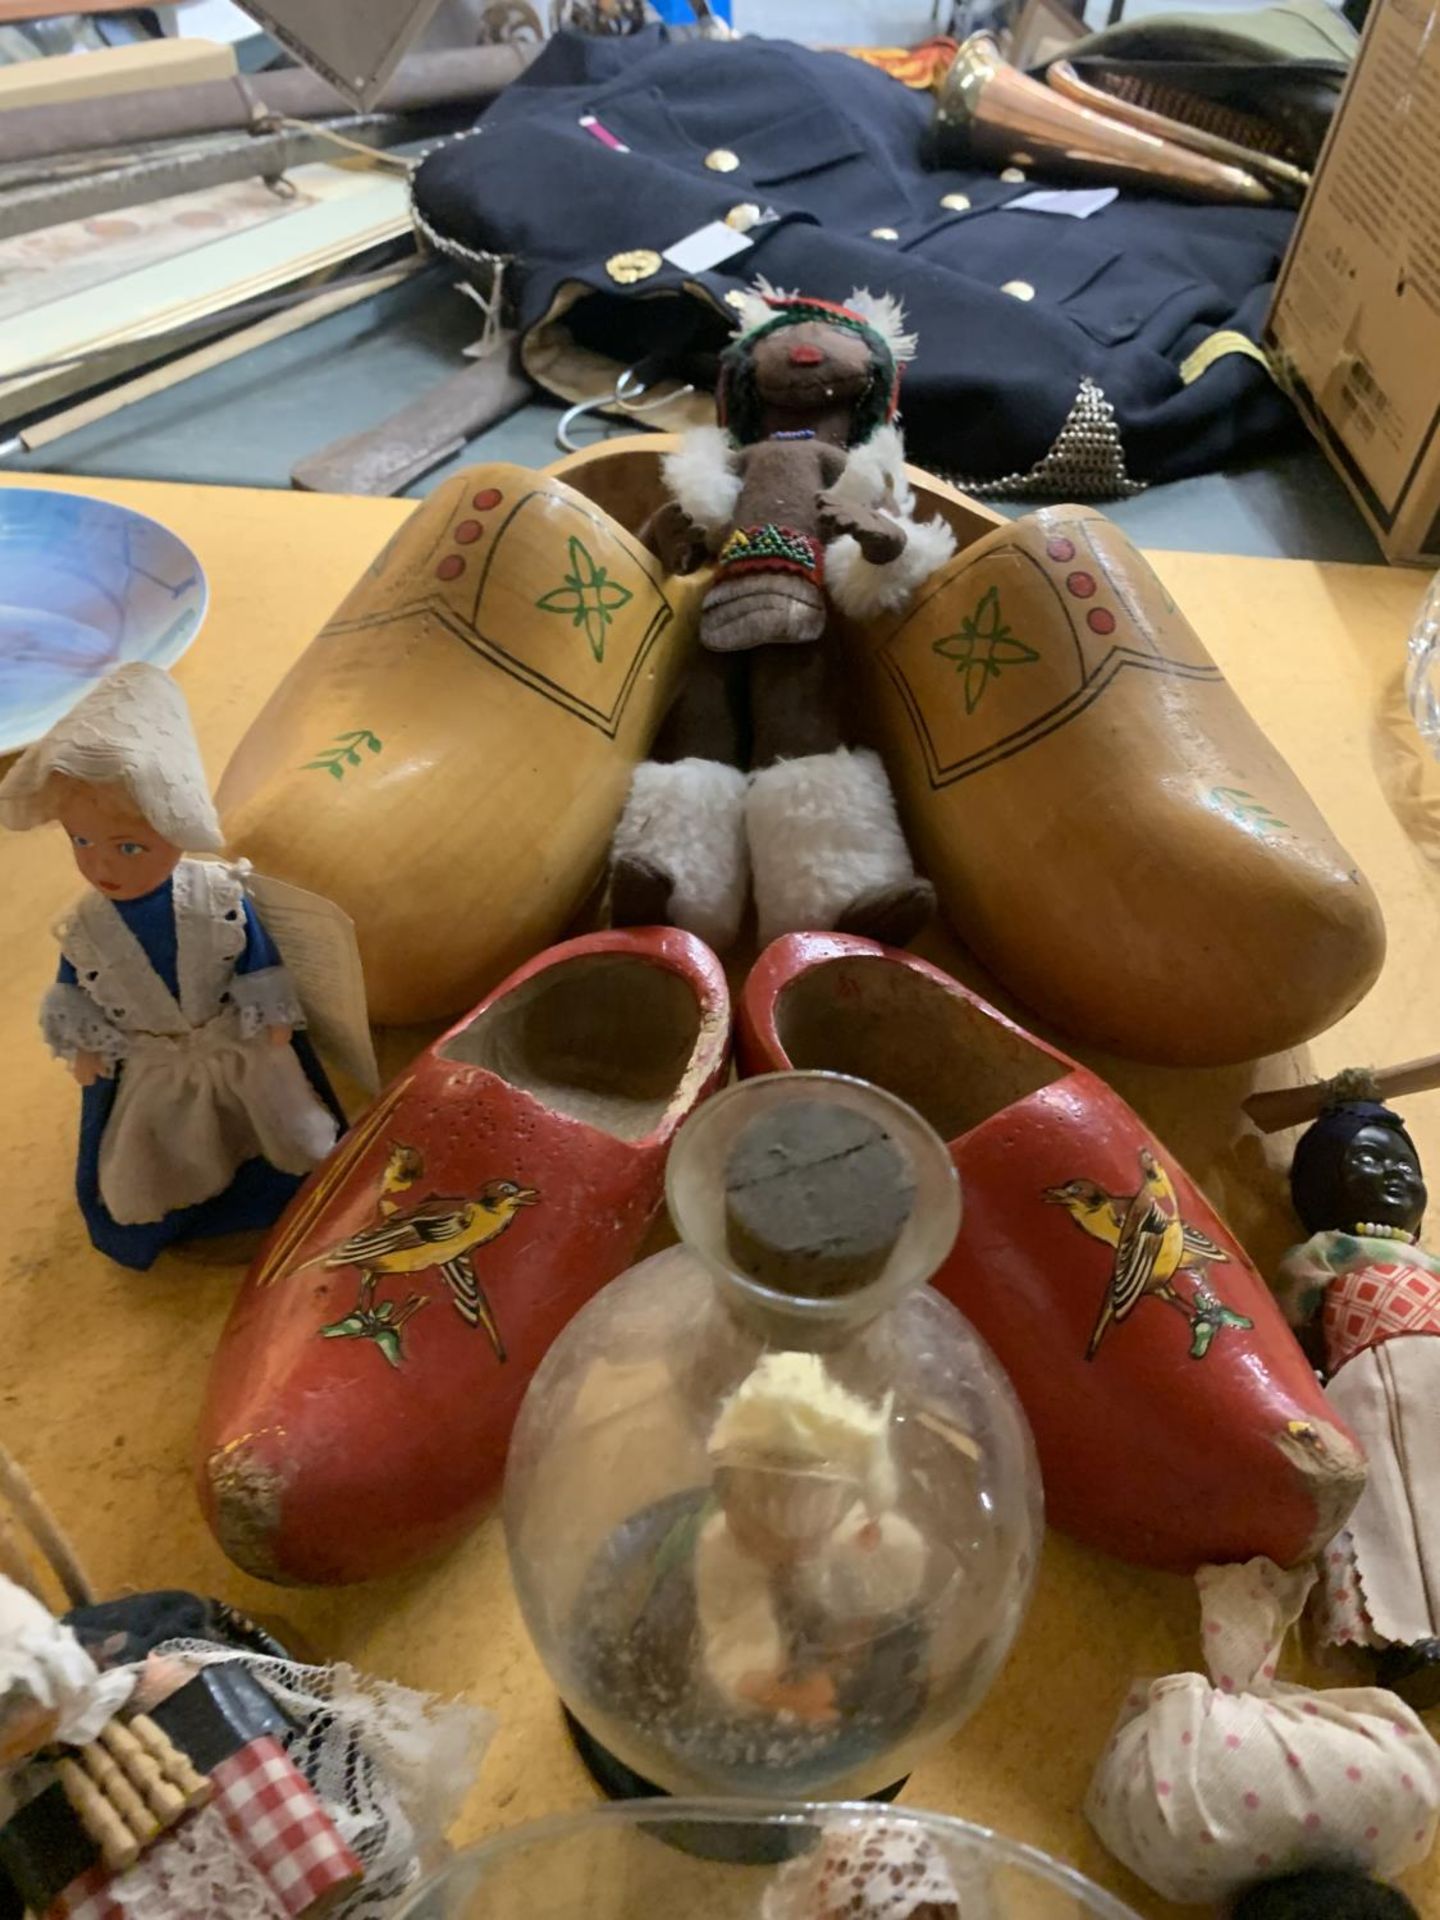 A COLLECTION OF VINTAGE DOLLS IN TRADITIONAL COSTUME PLUS TWO LARGE PAIRS OF WOODEN CLOGS - Image 2 of 2